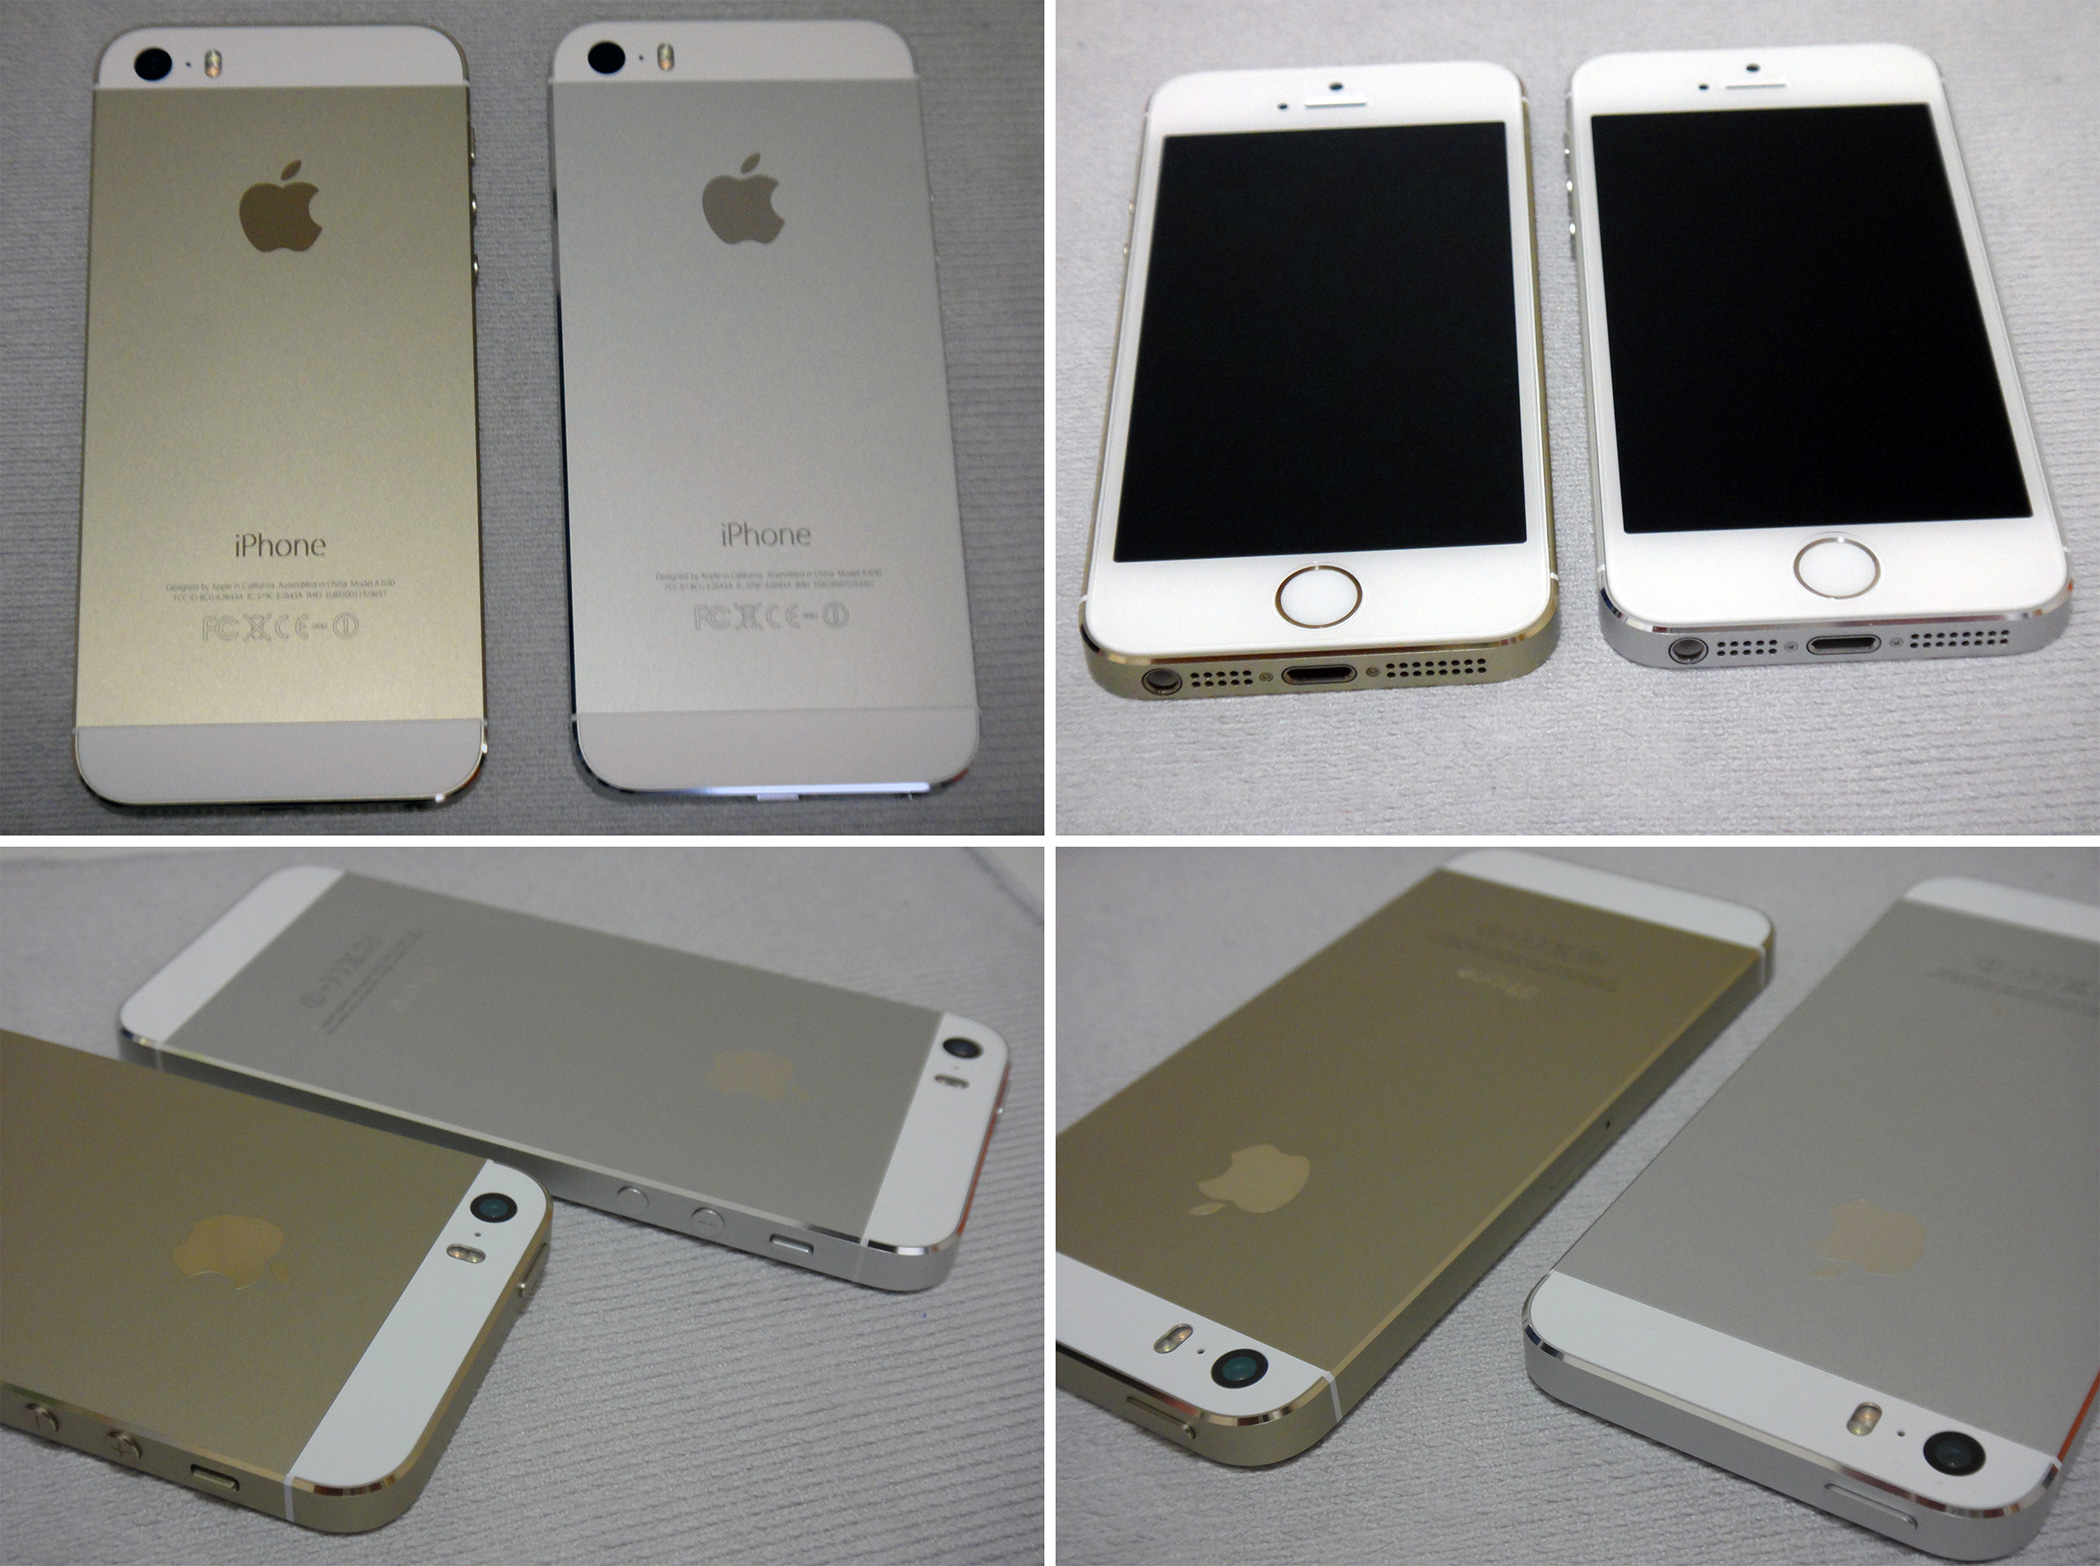 Iphone 5 год. Iphone 5s Silver. Iphone 5s серебристый. Iphone 5s Silver 64gb. Iphone 5s Gold.